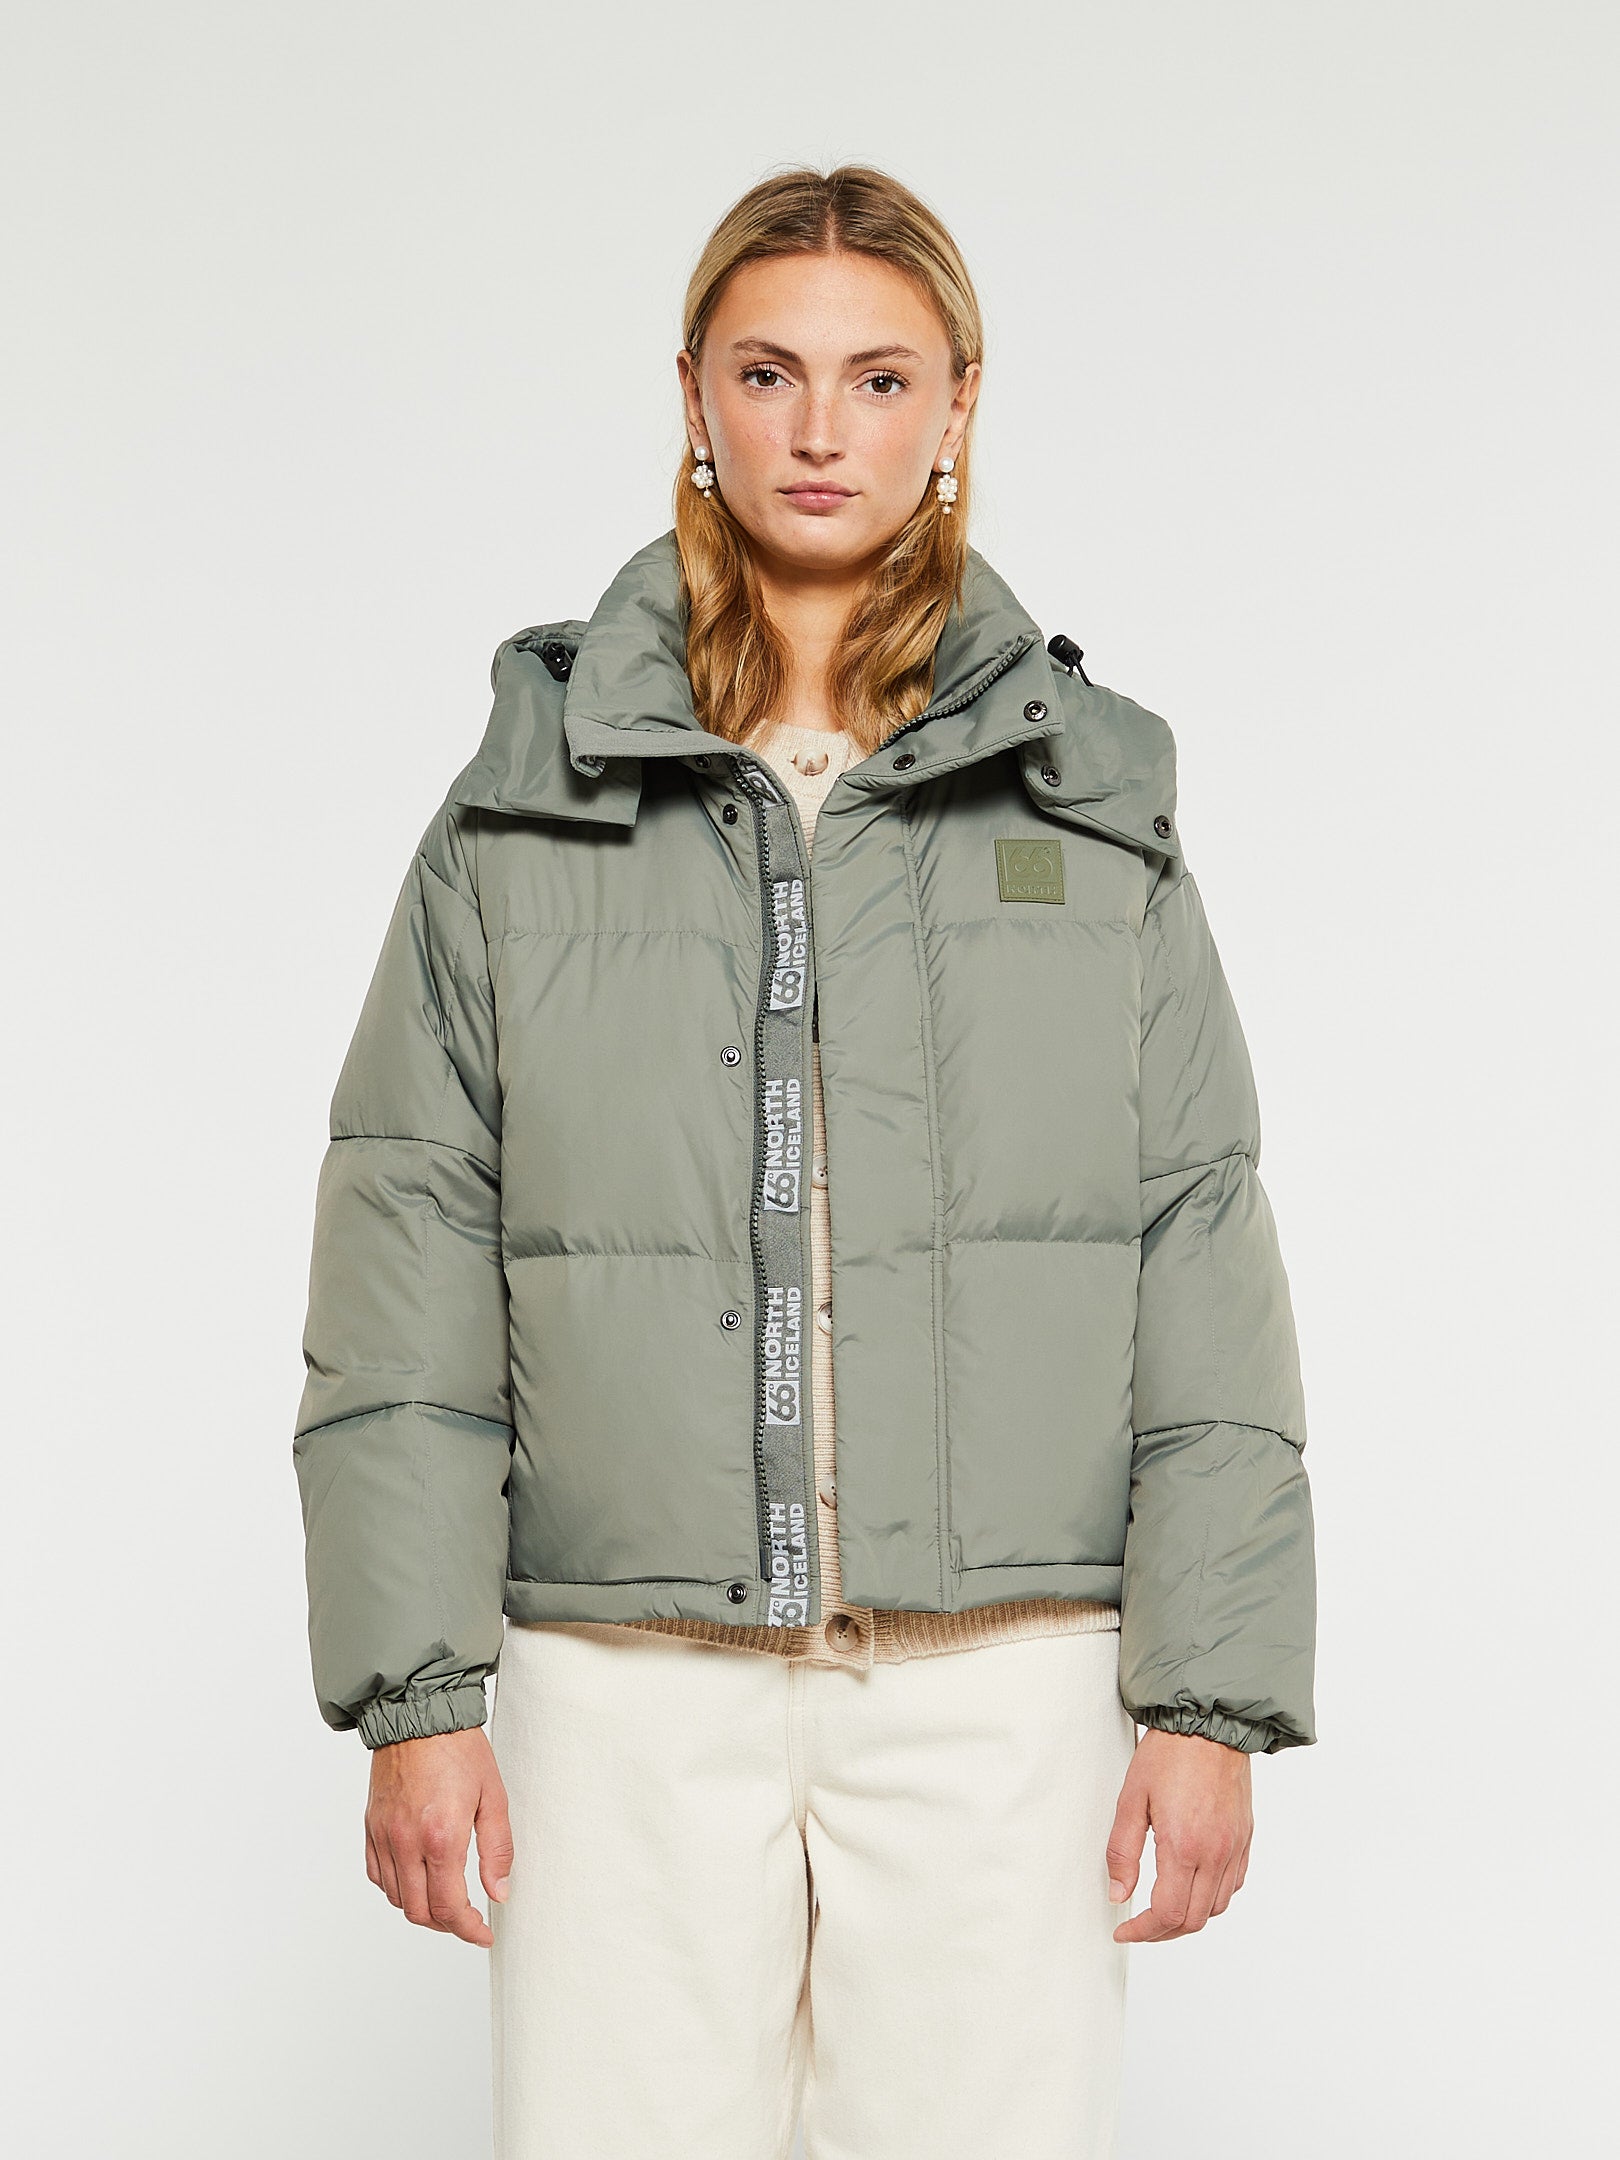 at selection Jackets Shop & the for | Coats stoy women